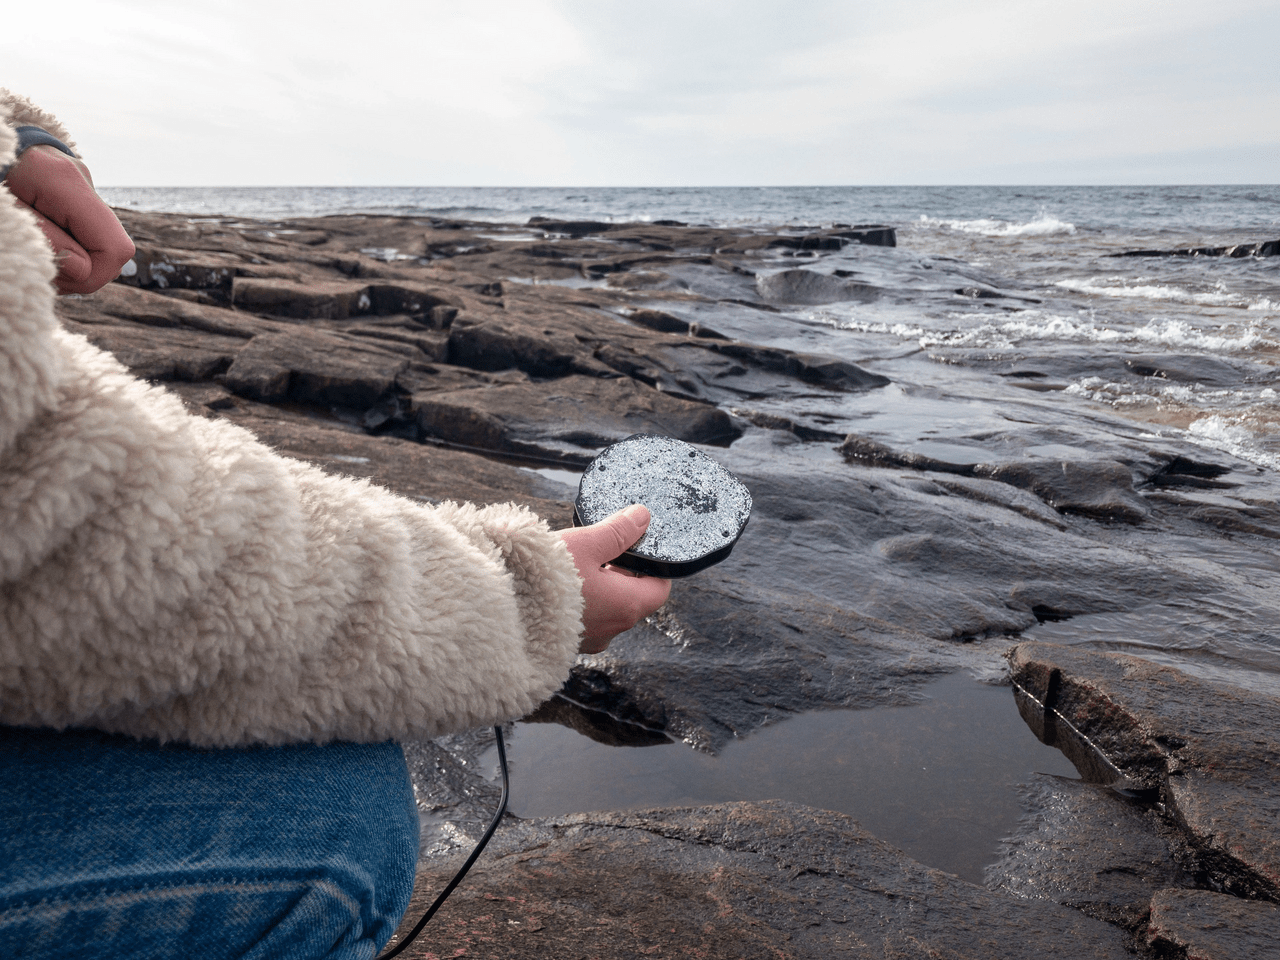 A photo of somebody holding a special flat rock in a shore scene full of larger, rougher rocks